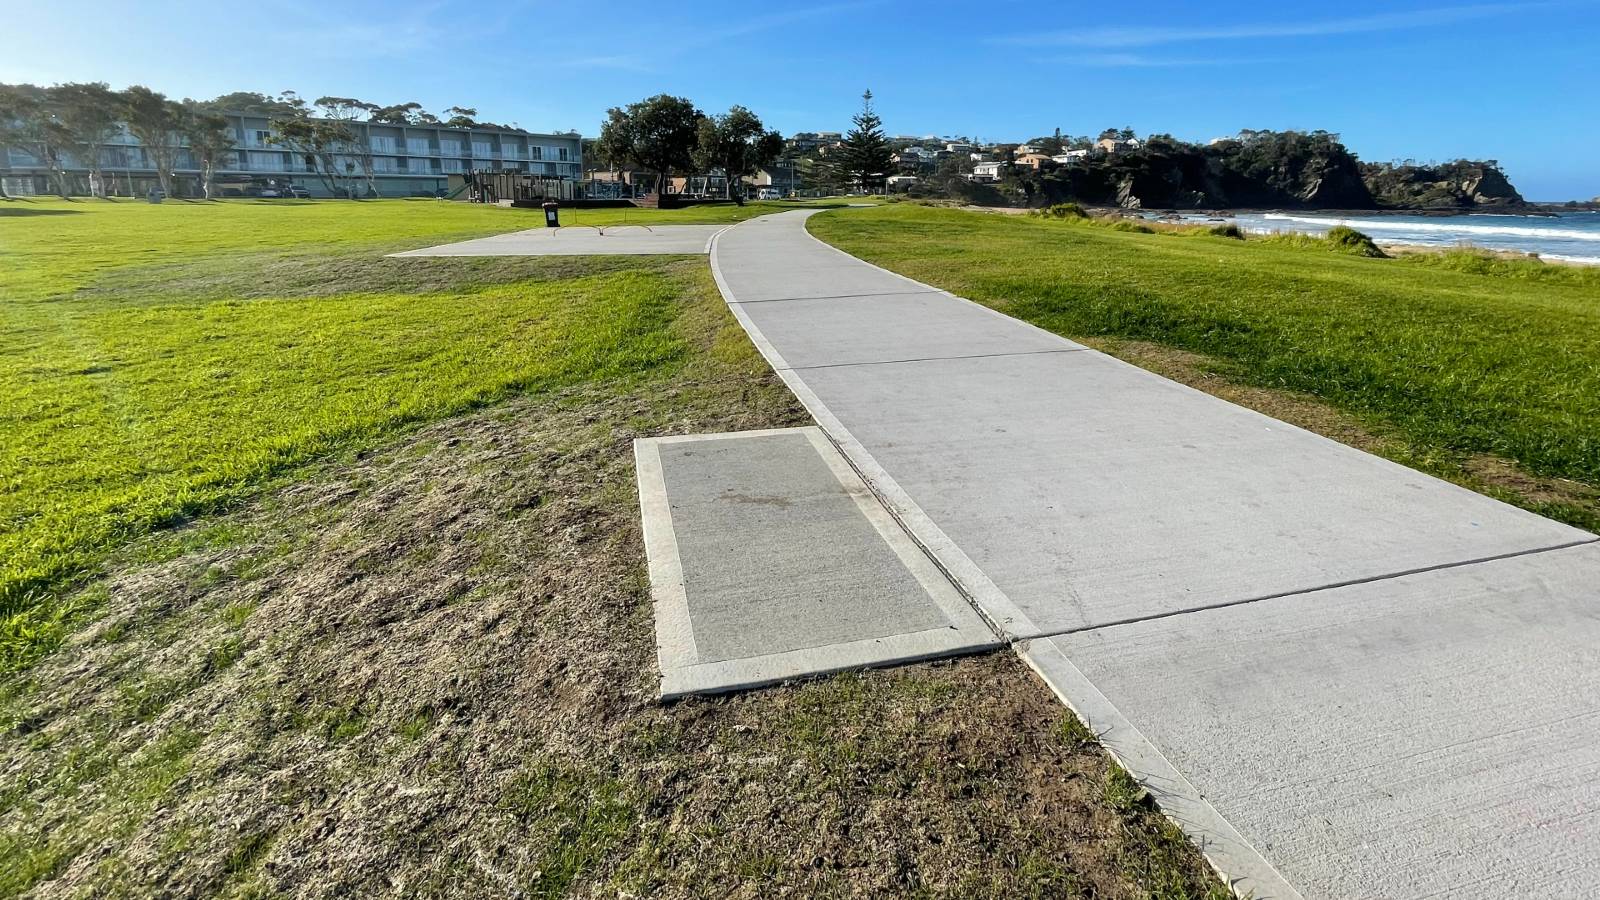 Image Photo of a concrete pathway